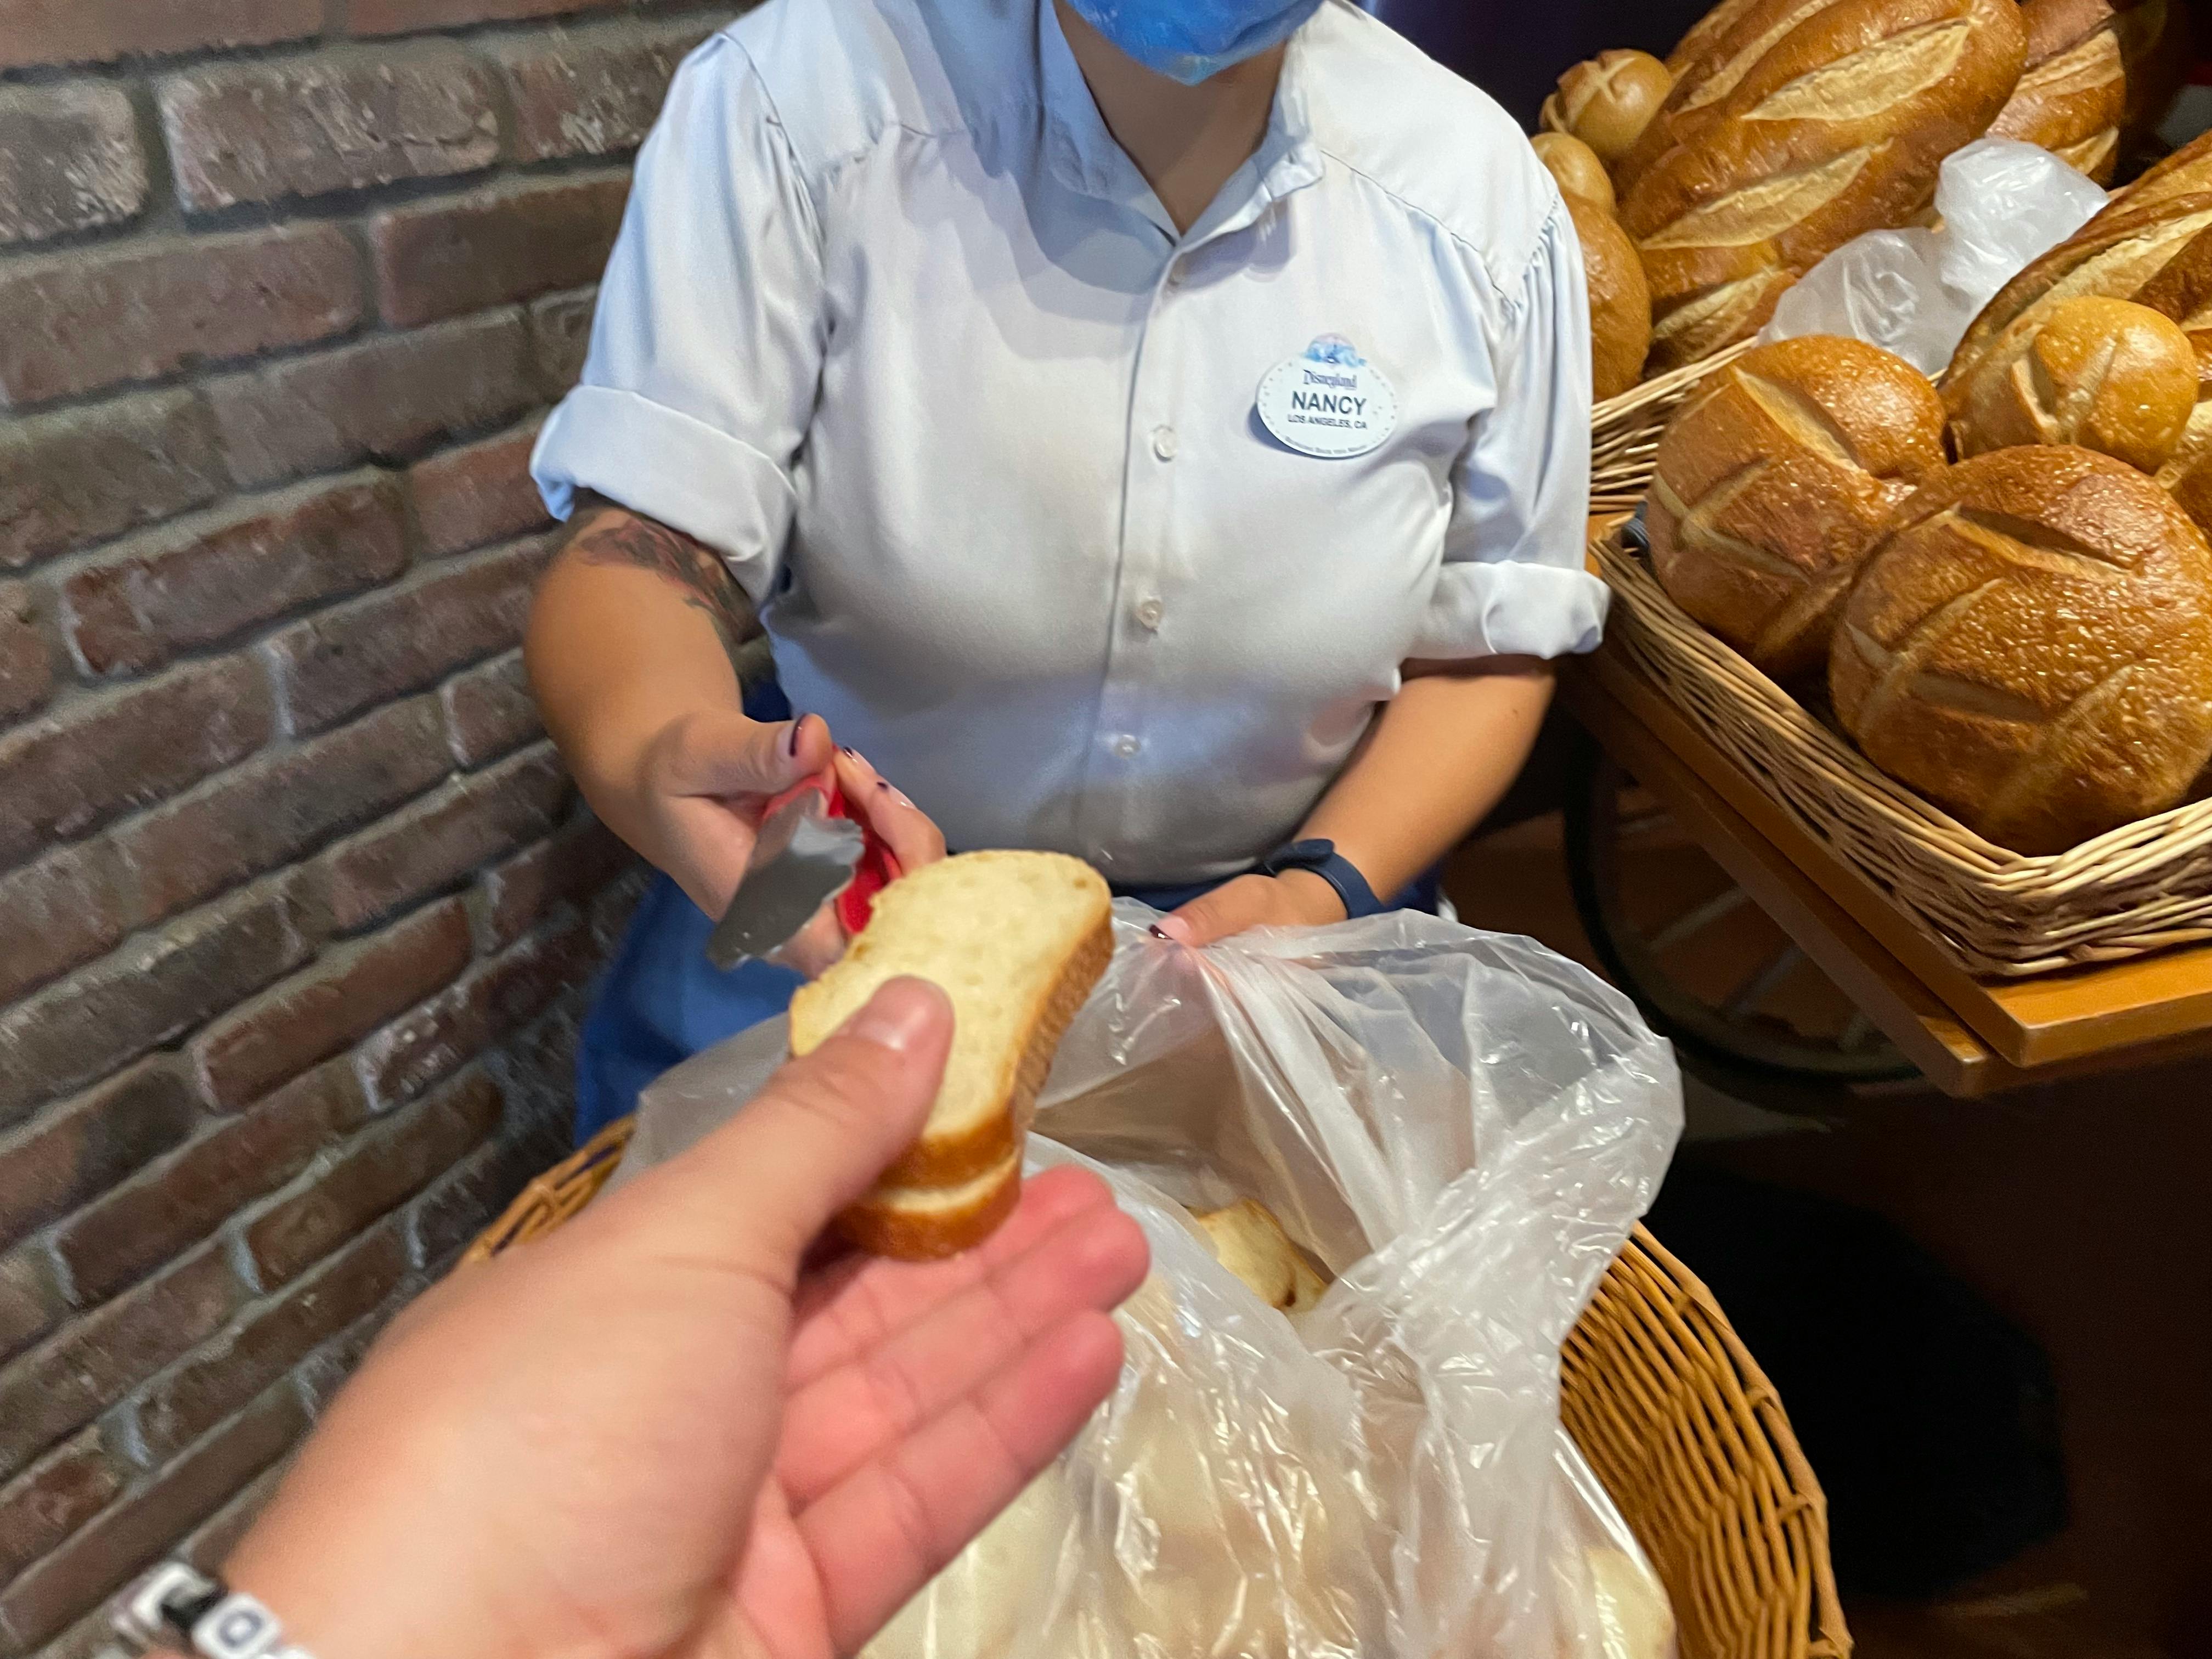 A Disney employee handing free bread to a patron in Boudoin Bakery at Disneyland.